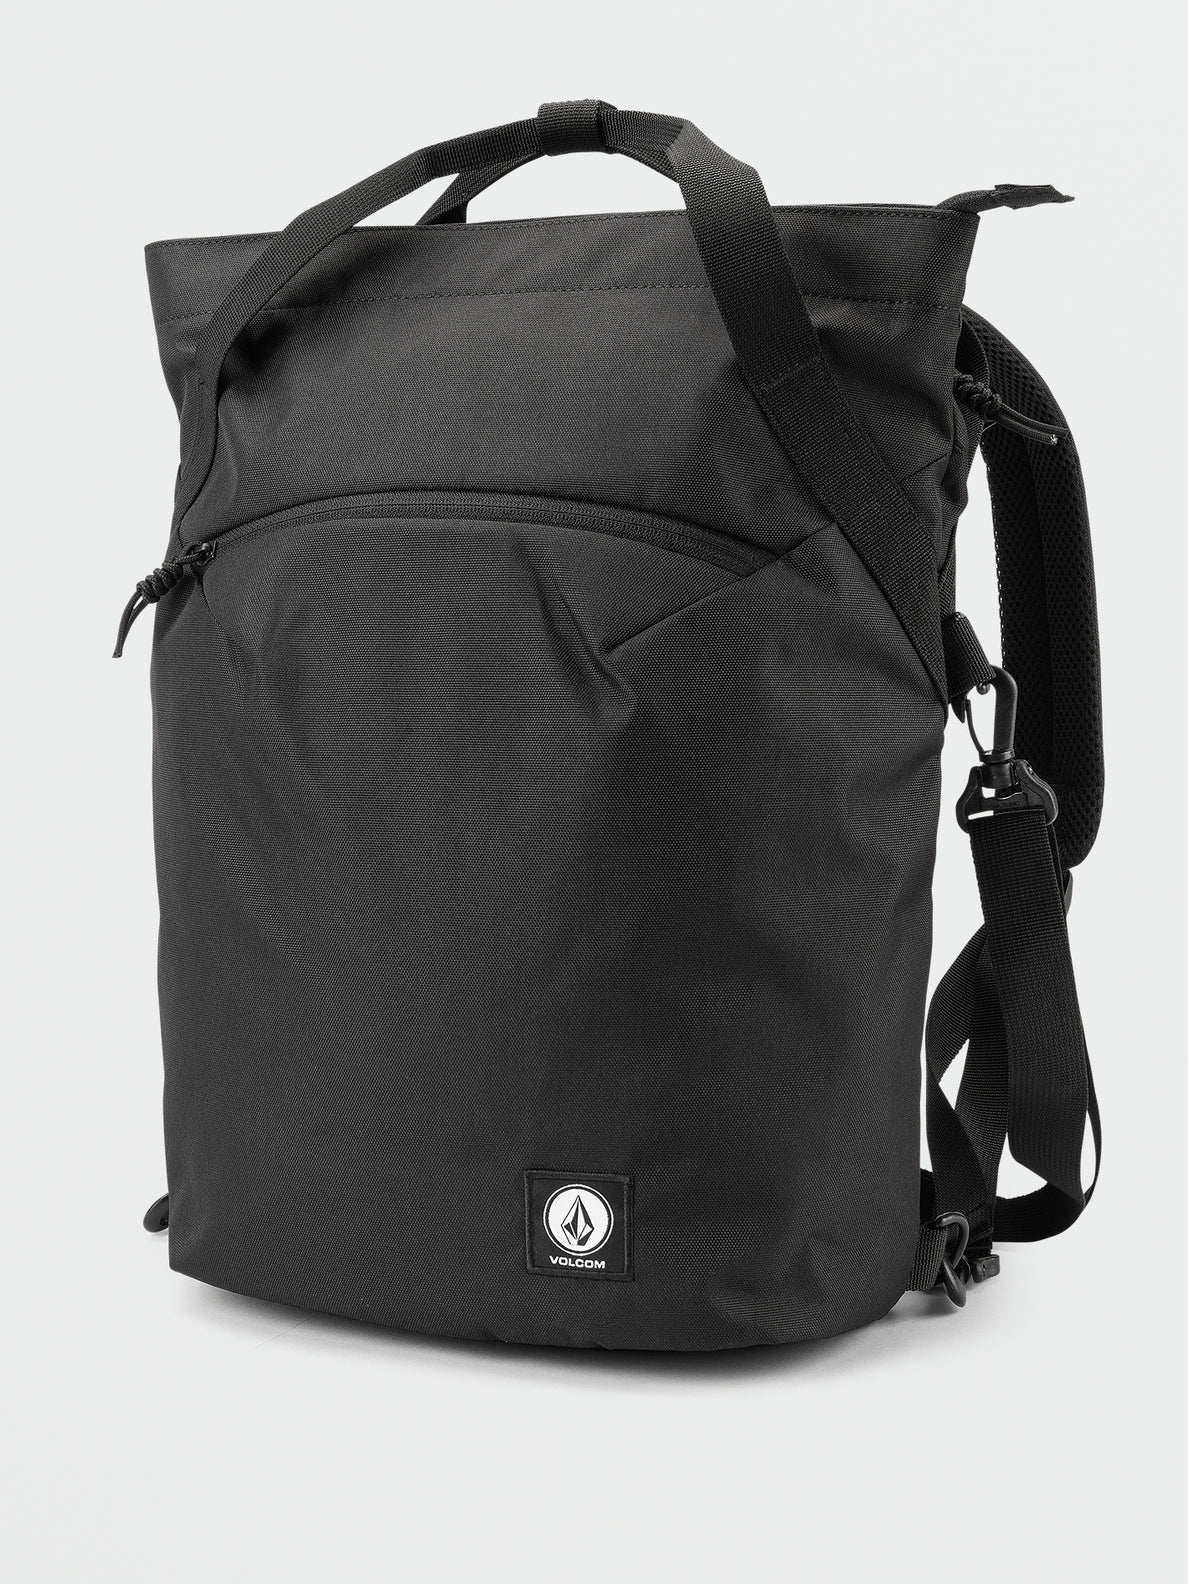 Day Trip Poly Backpack - Black